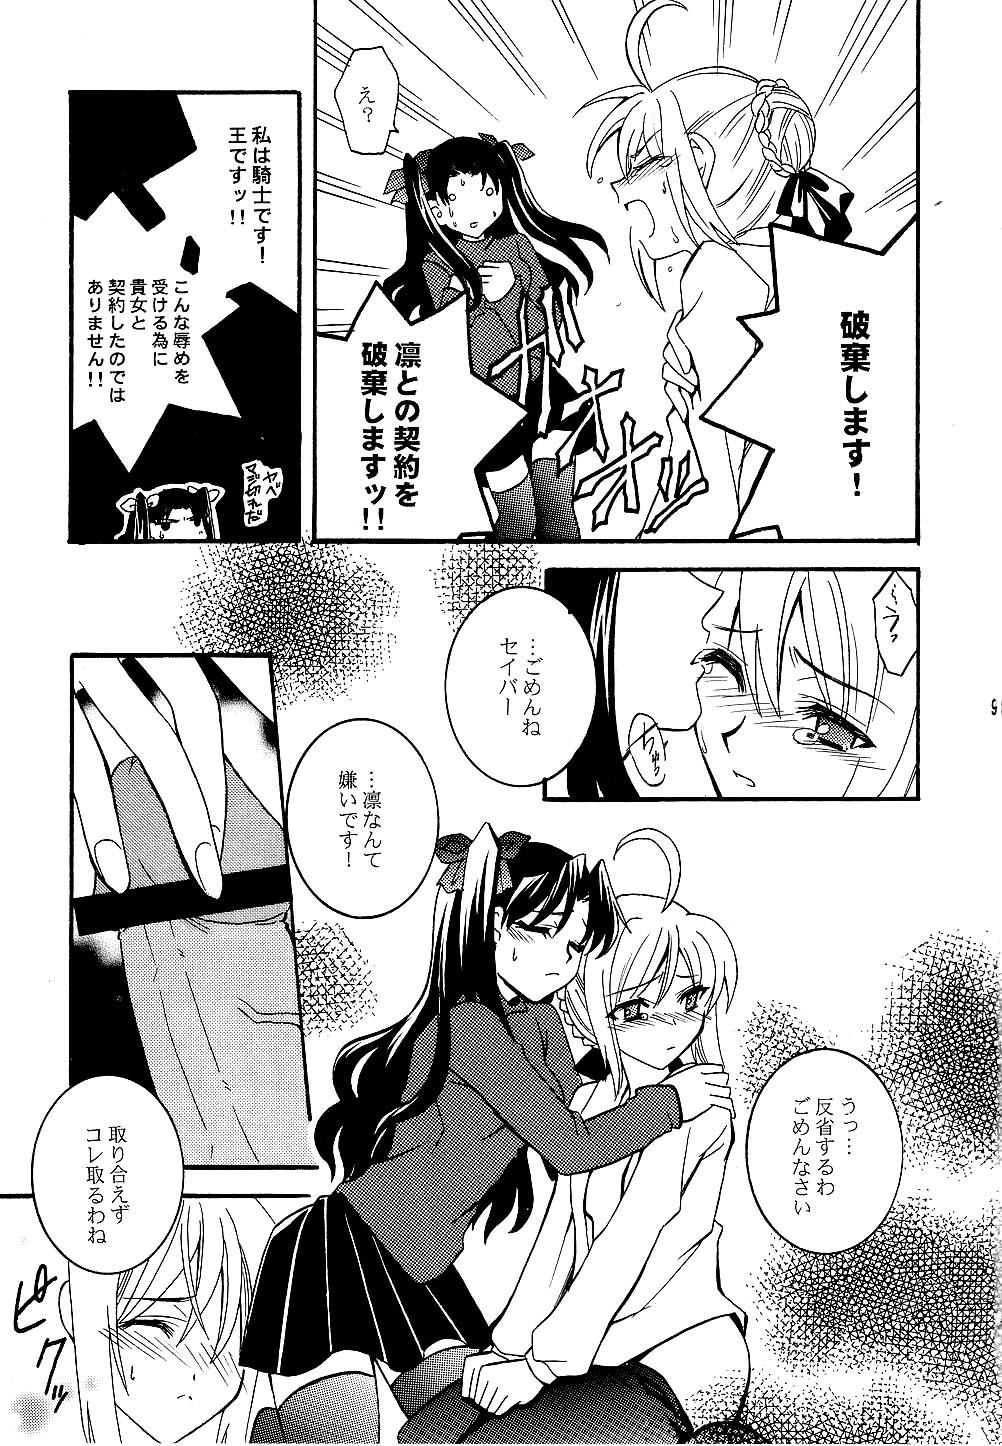 Asslick KING KILL 33 - Fate stay night Perverted - Page 8